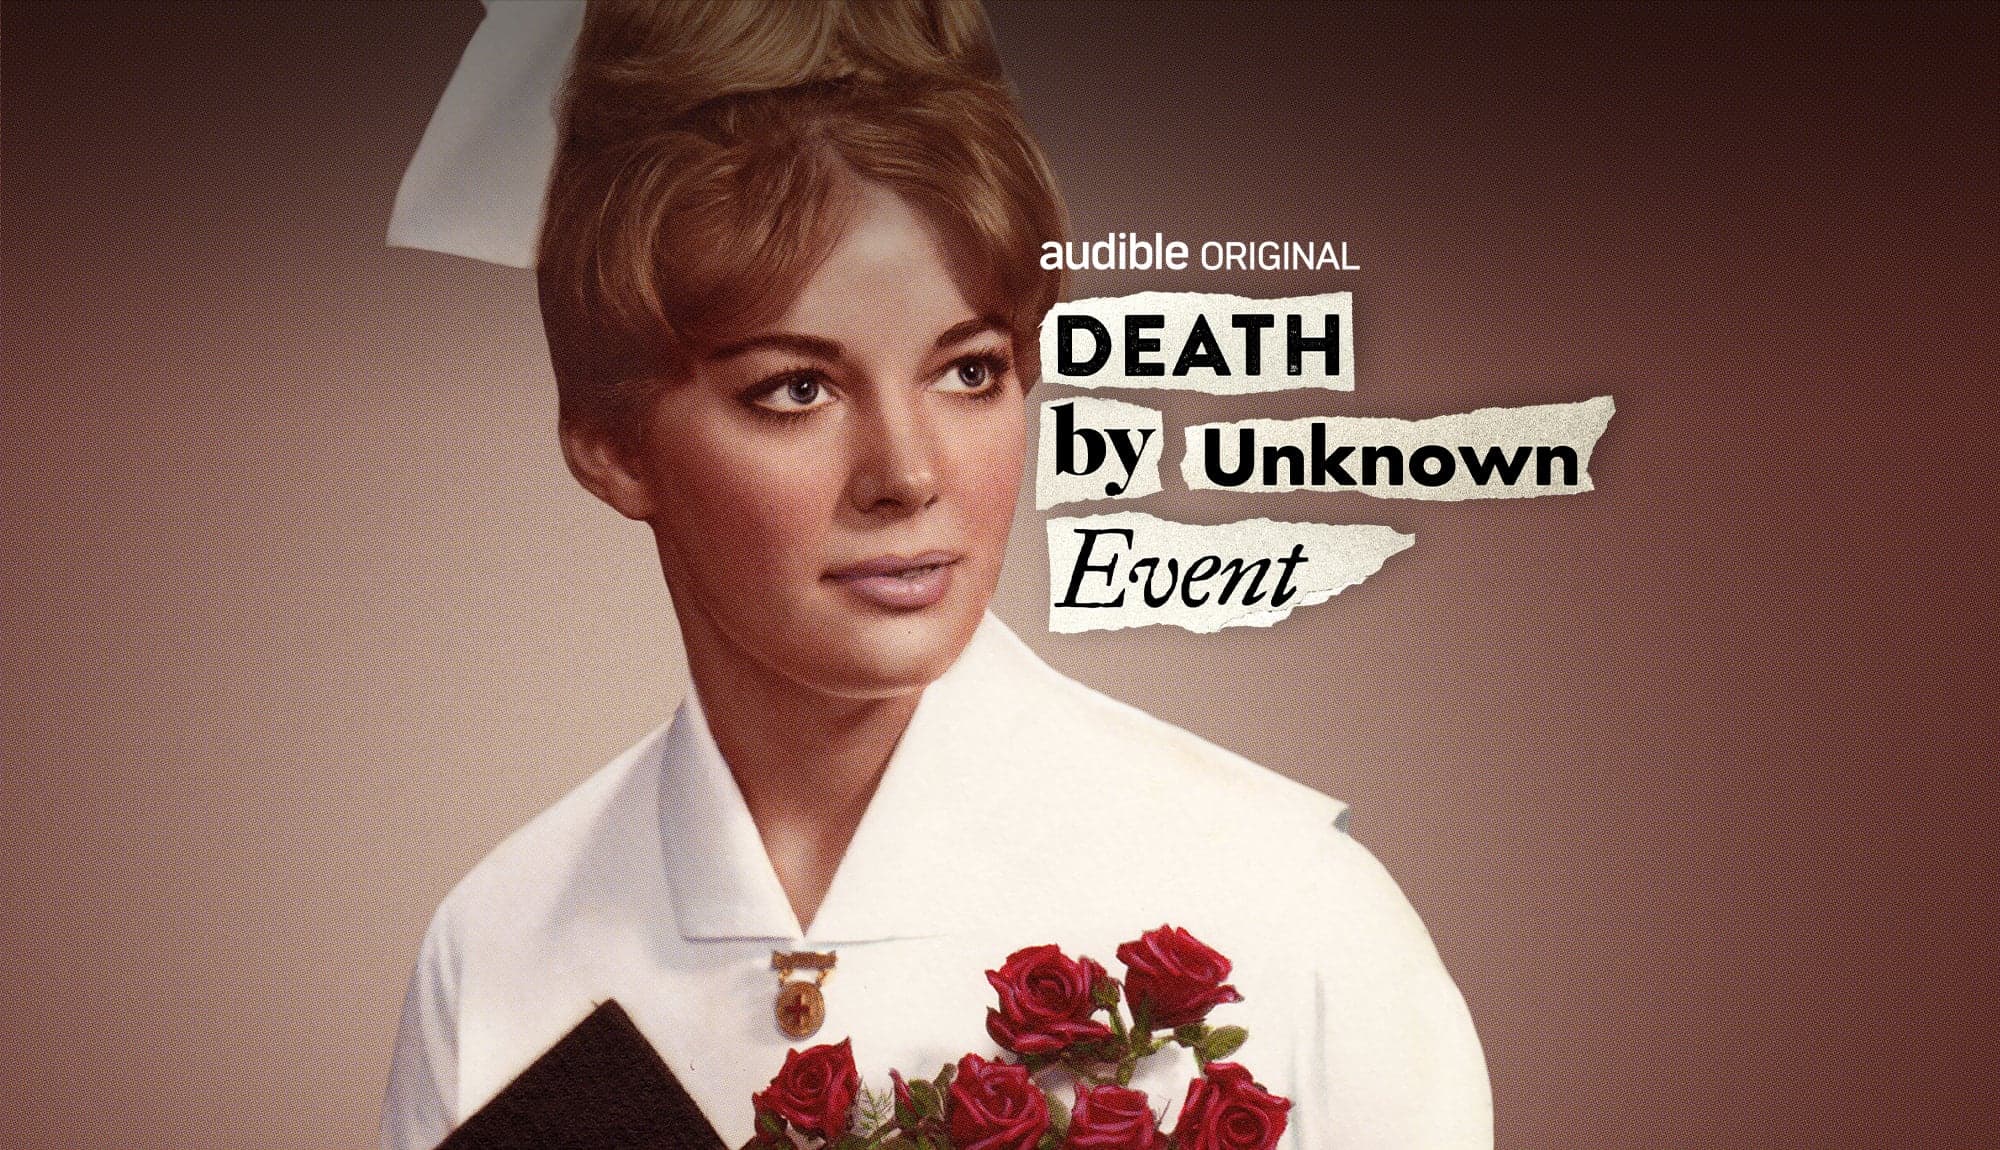 Our Limited Audio Series, DEATH BY UNKNOWN EVENT, is Out Now!